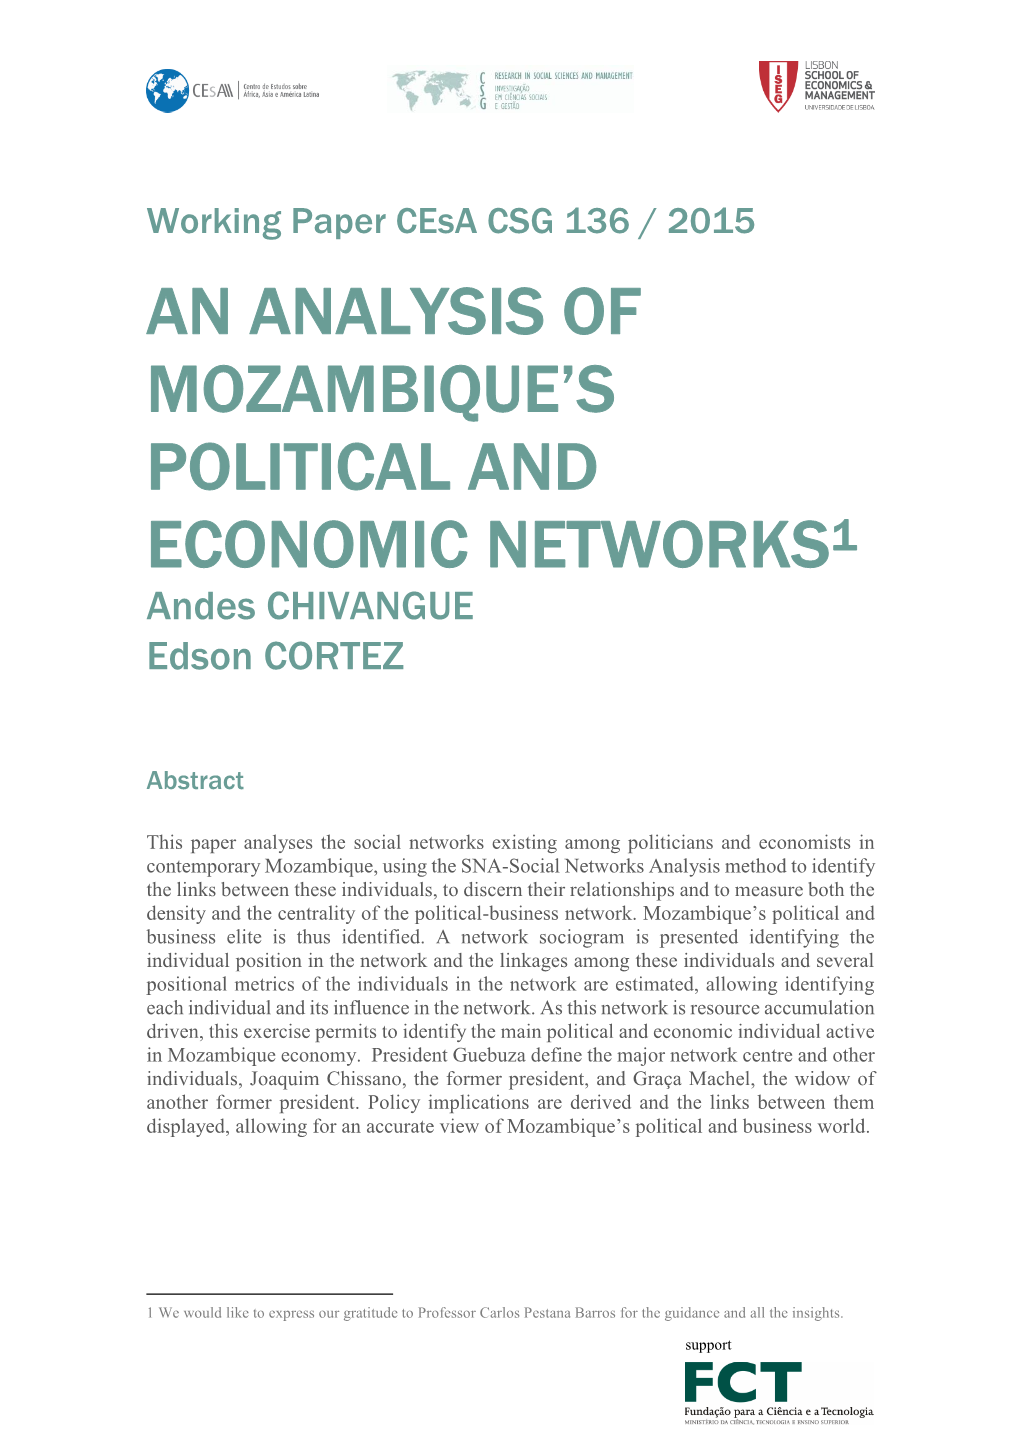 An Analysis of Mozambique's Political and Economic